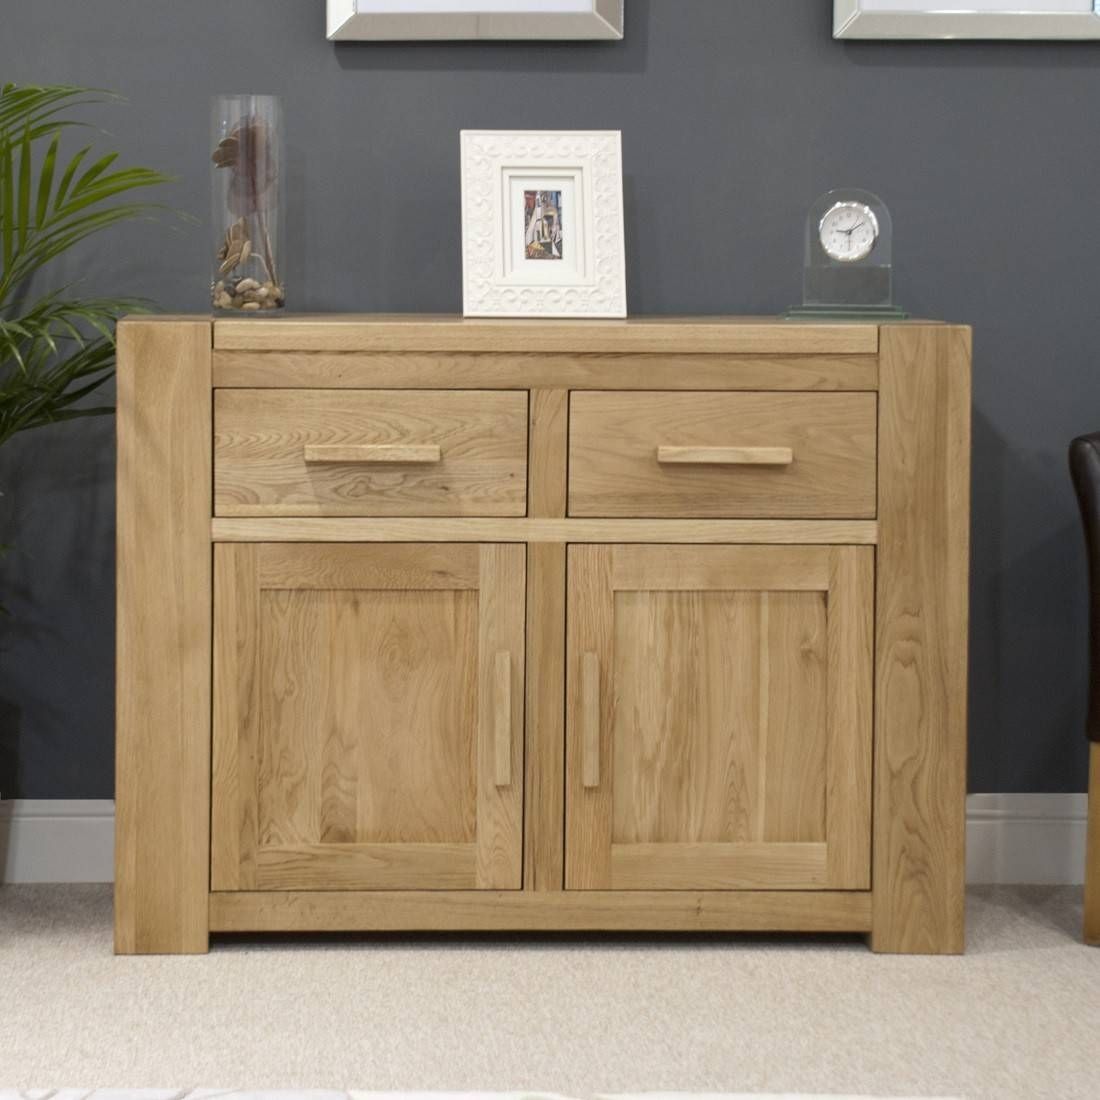 Sideboards Uk. Modern Sideboards Online Uk. Rimini Collection Two Intended For Narrow Oak Sideboards (Photo 5 of 30)